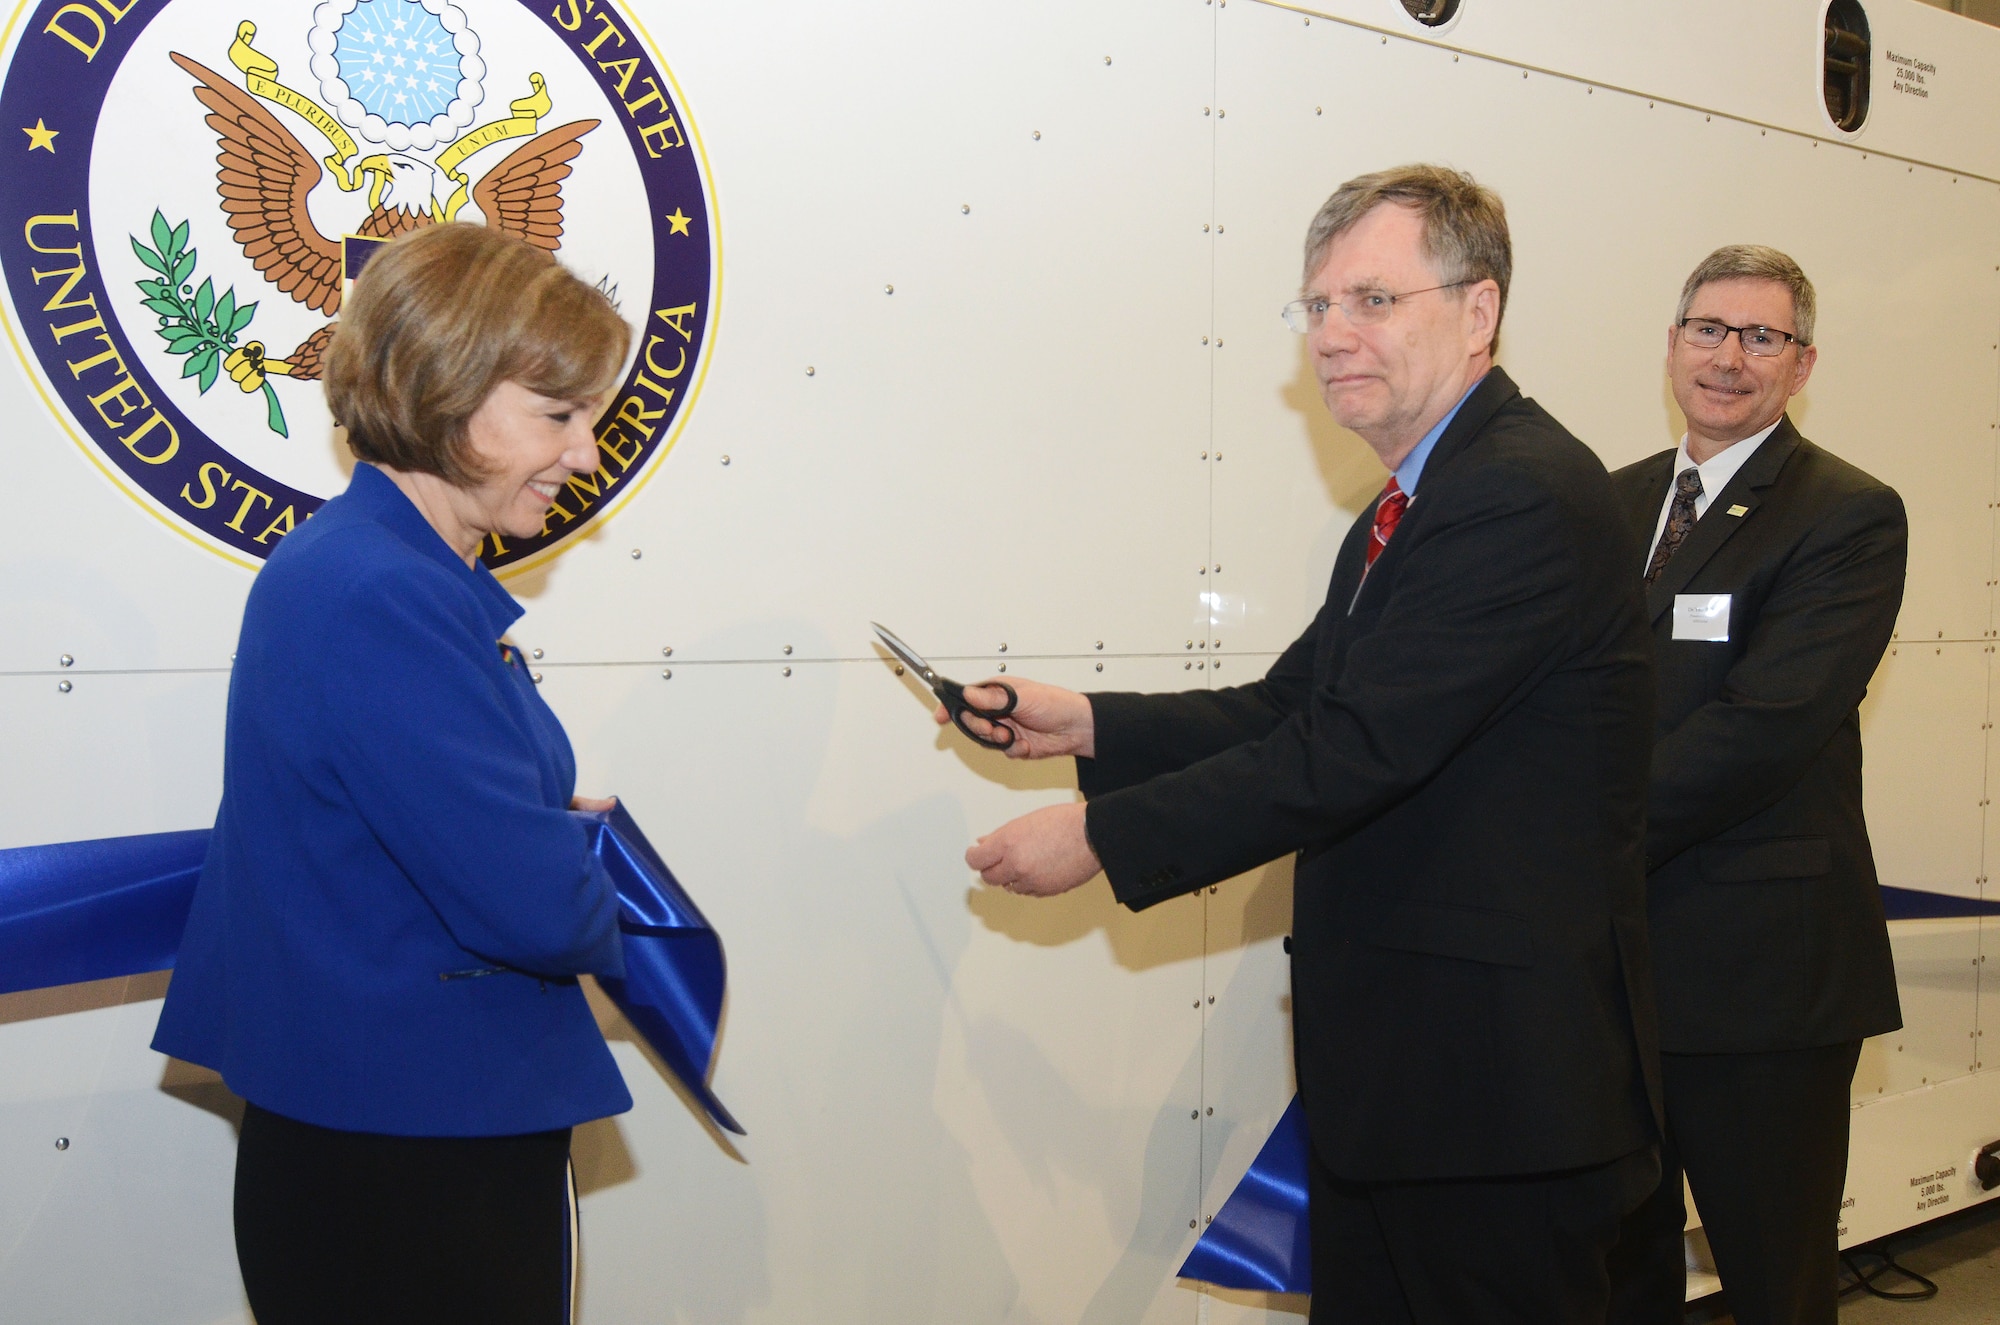 Patrick Kennedy, Under Secretary of Management from the United States Department of State; Barbara Bennett, President and COO of Vulcan, Inc.; and Dr. Tom Sack, President and CEO of MRI Global, perform the ribbon cutting ceremony during the unveiling of the Department of State Containerized Biocontainment System held at Dobbins Air Reserve Base, Ga. Aug 11, 2015. (U.S. Air Force photo/Don Peek)